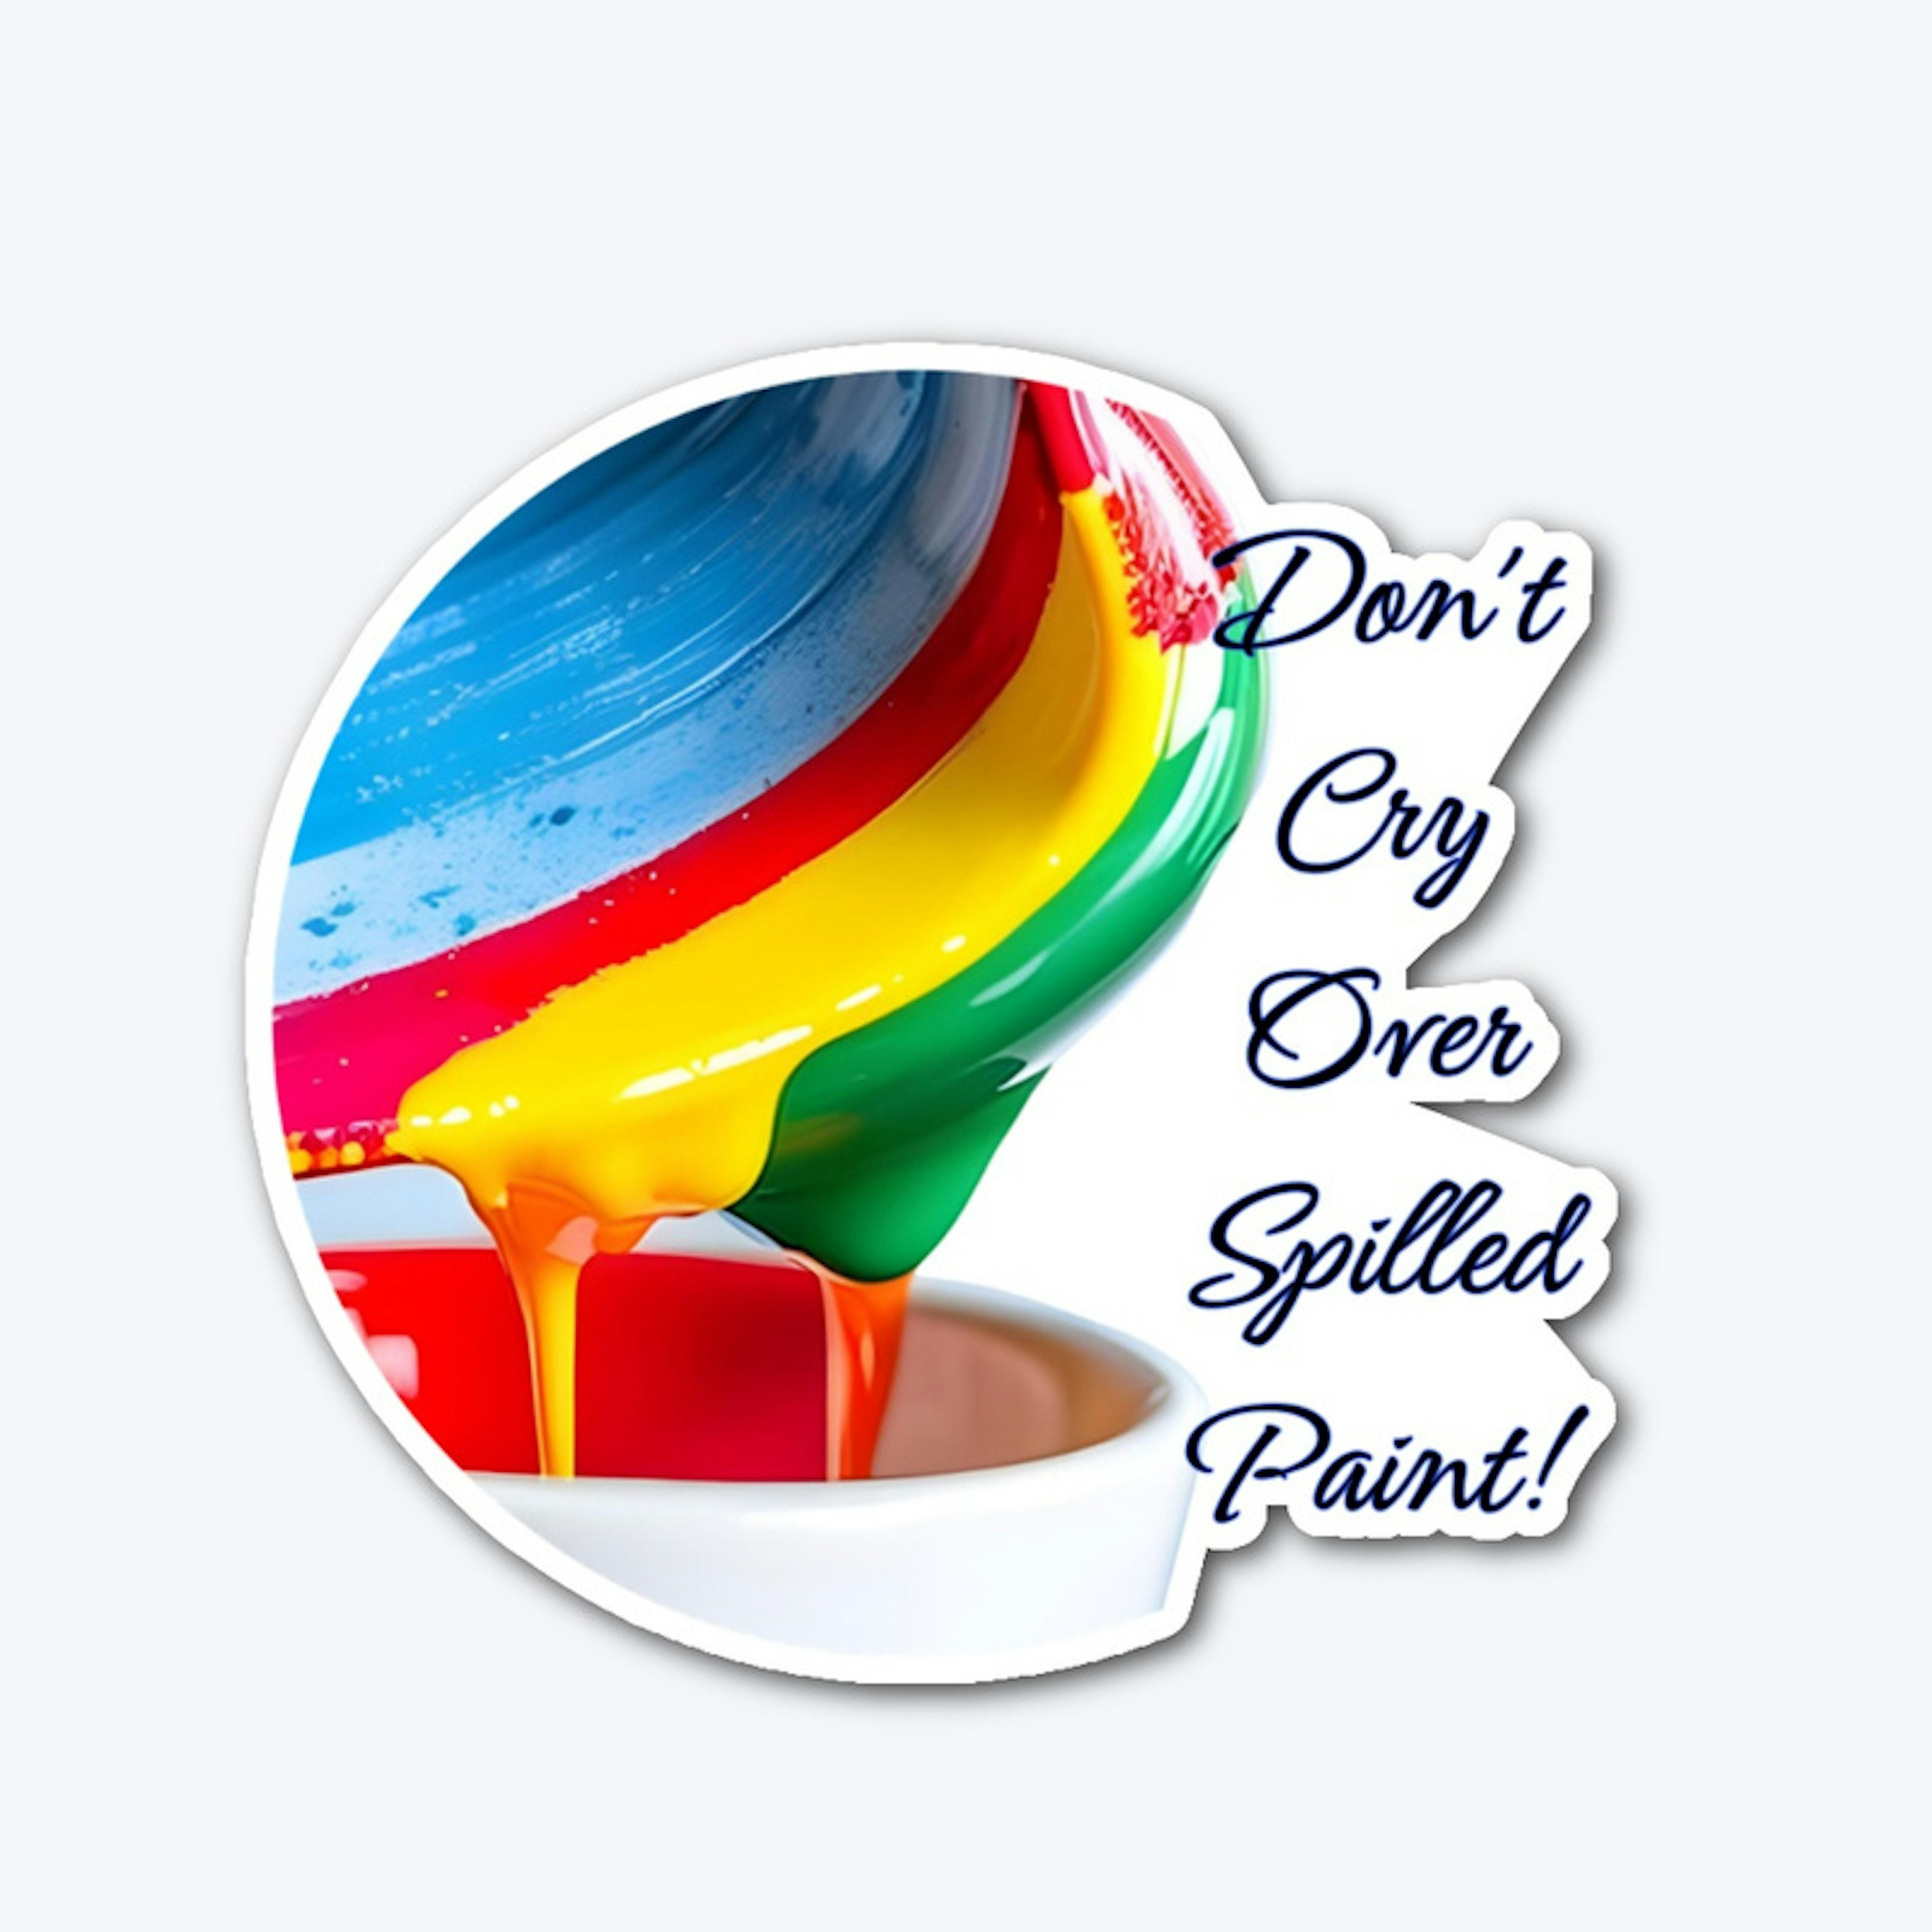 Don't Cry Over Spilled Paint!